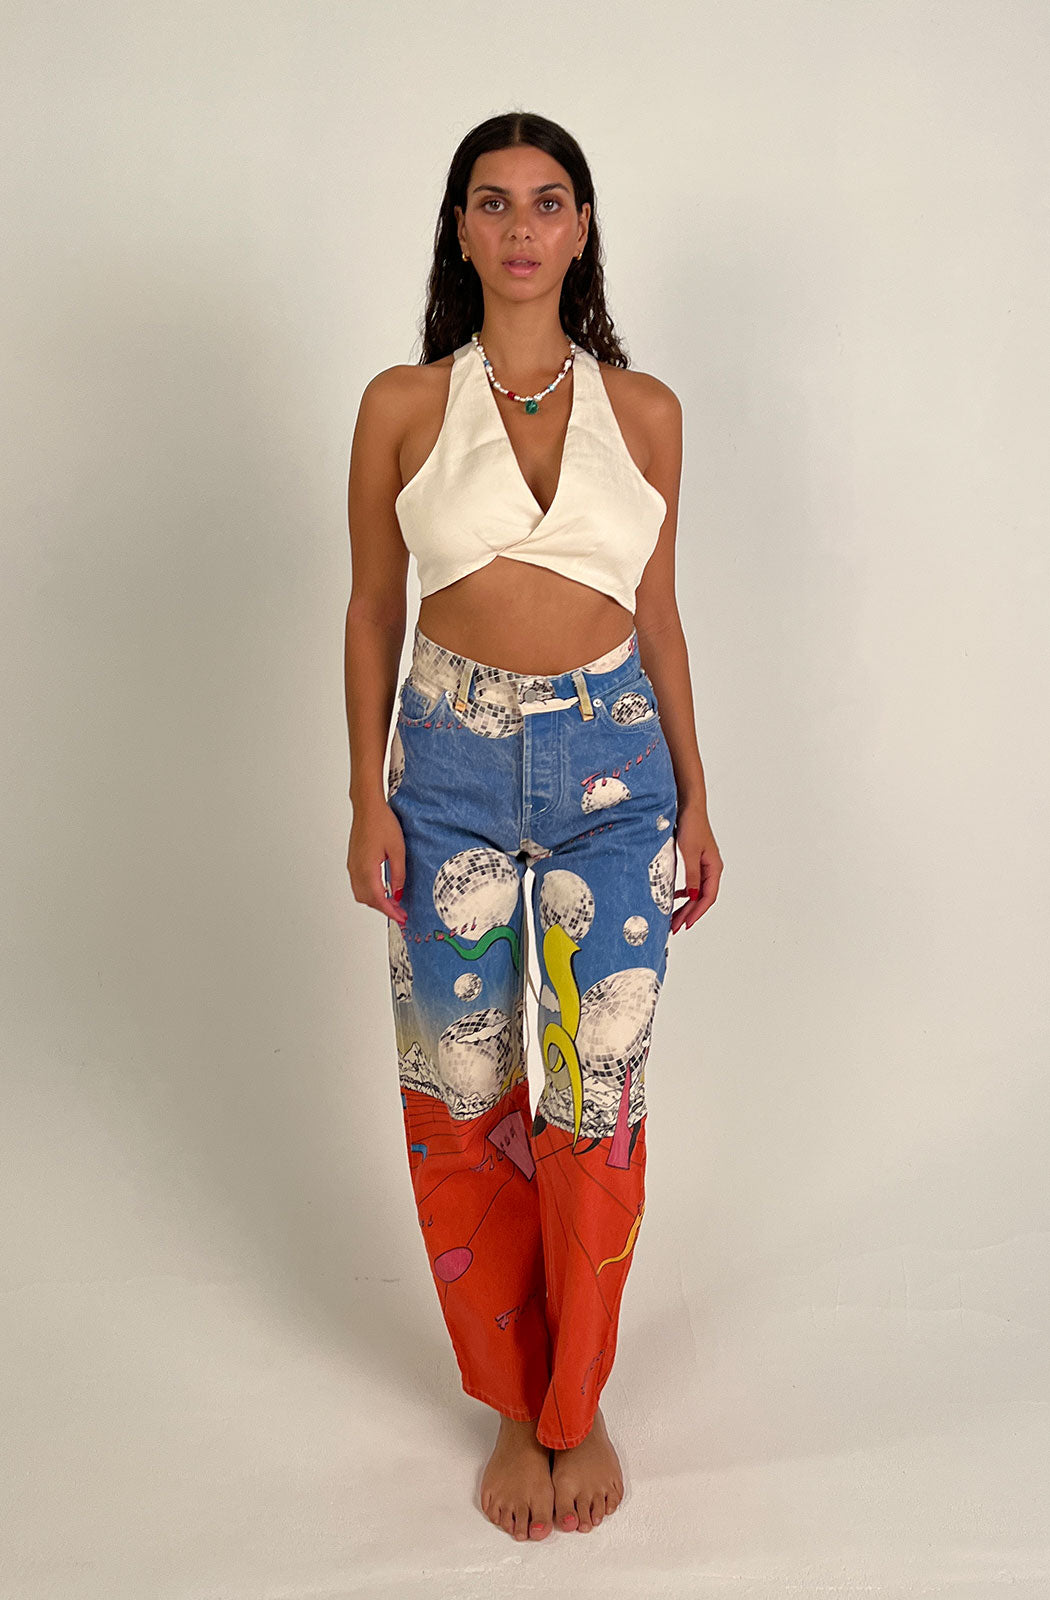 Women's Discoteca Jeans in the all-over multi-coloured discoteca print from the archive. The graphic jeans are high-waisted with a straight leg fit, iconic 5-pocket design, waistband with belt loop and a button and zip fly. Made from hand-crafted, incredibly flattering premium denim. Model front view